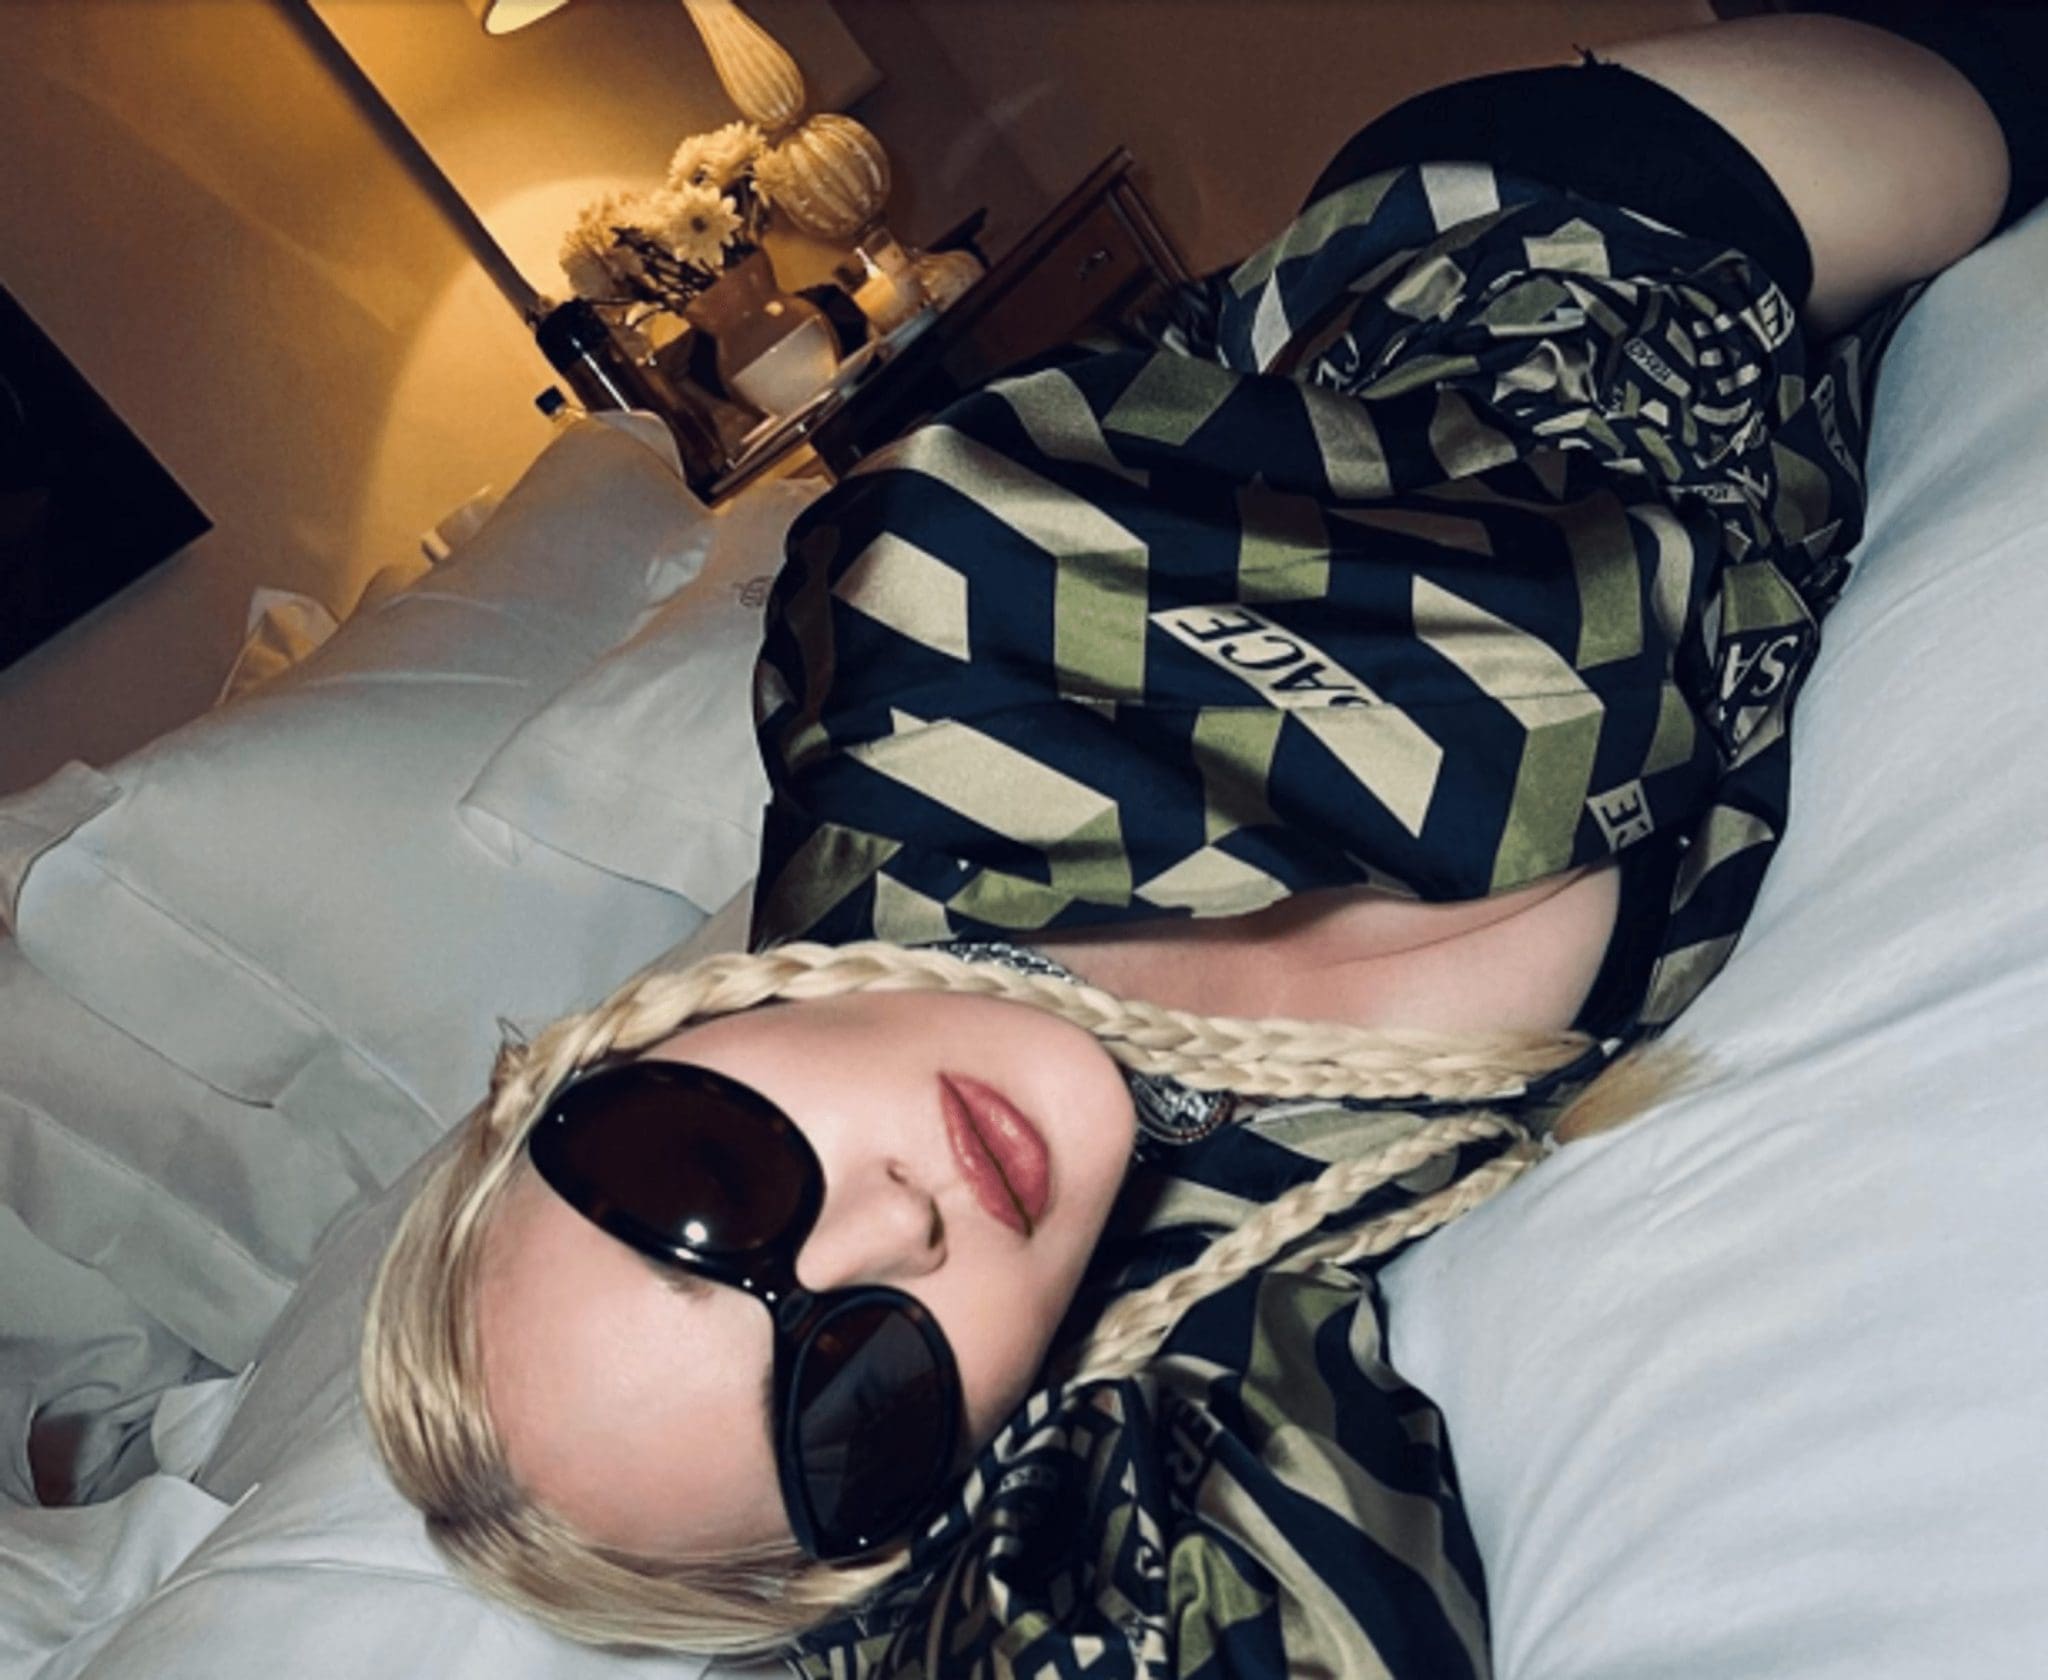 Madonna's photo shoot in bed causes fans concern